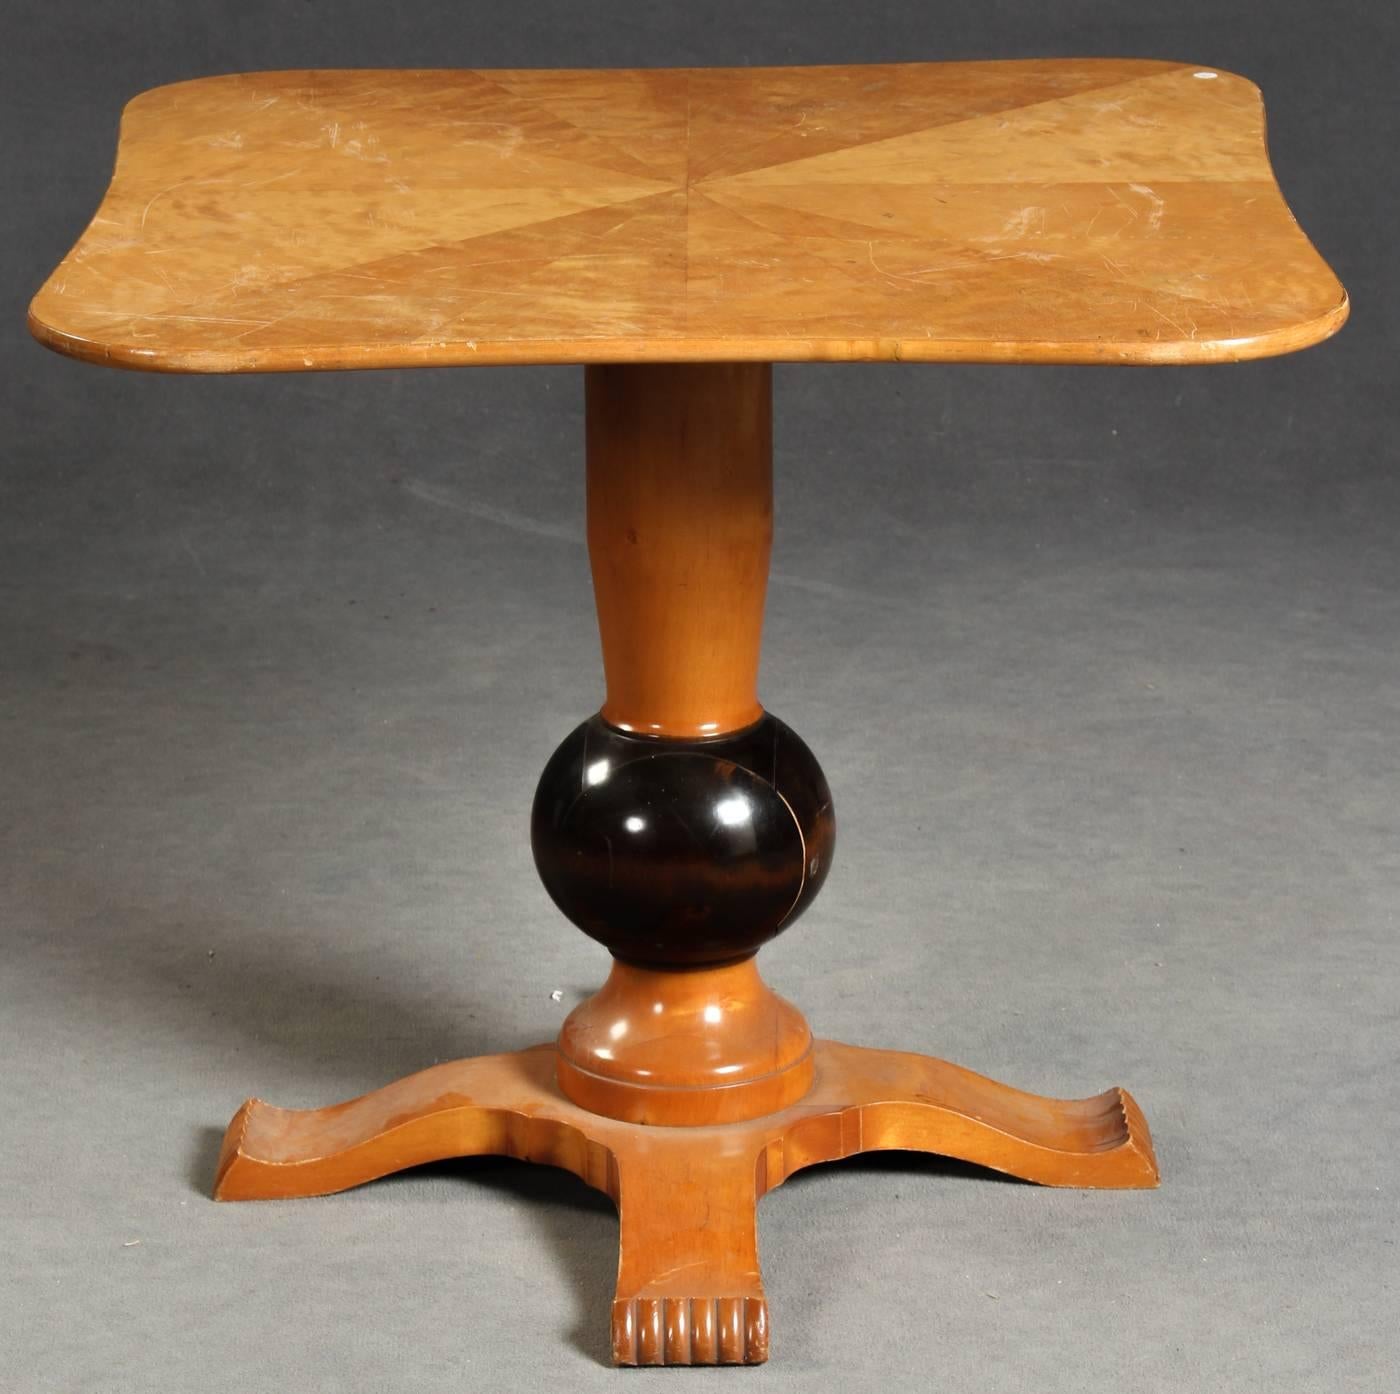 Art Deco table on pillar-shaped four-star foot, birch and cherrywood. Made in Germany in the 1930s.
Measures: H 62 cm, L 71cm, B 71 cm.